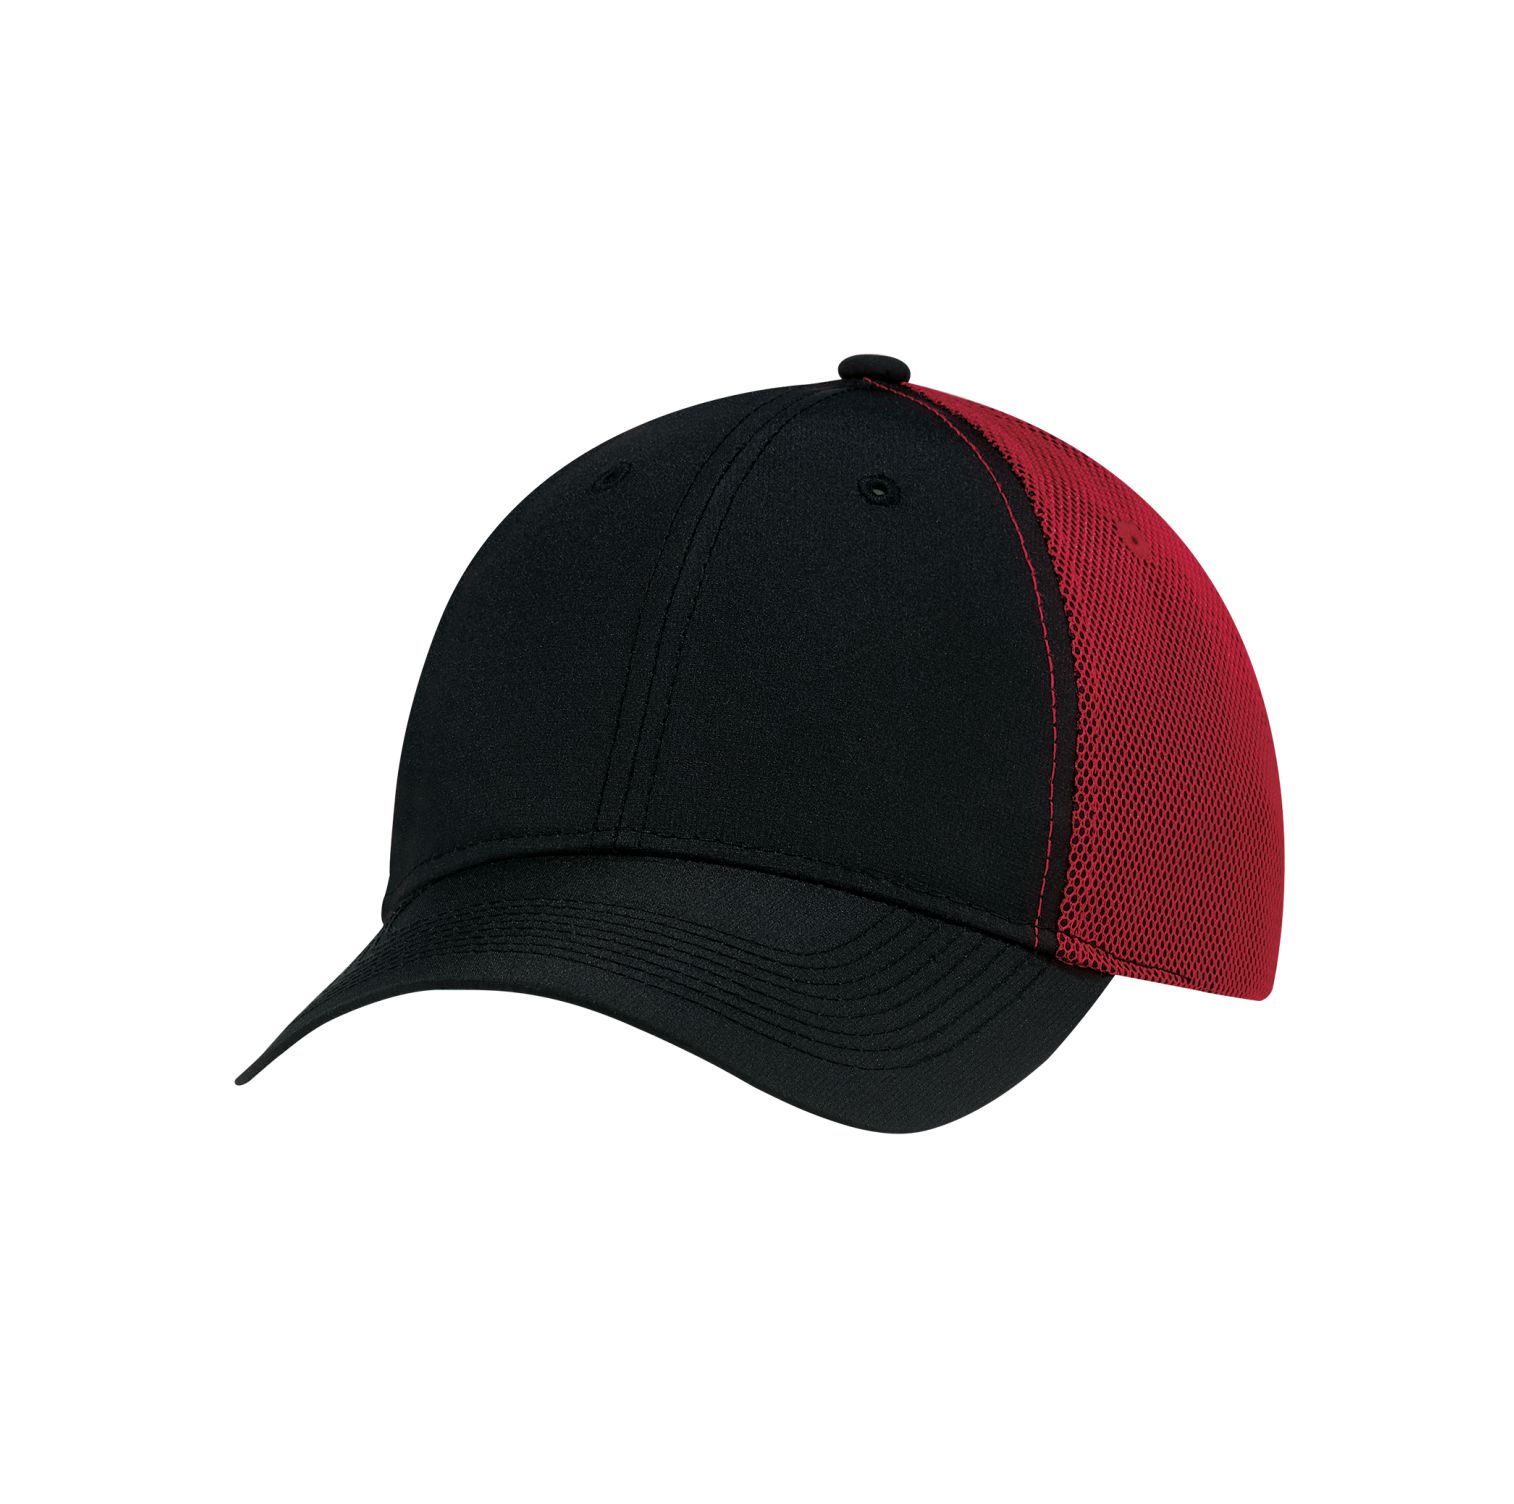 AJM Polyester Rip Stop / Polyester Rip Stop Bonded Mesh 6 Panel Constructed Full-Fit Hat #1B637M Black / Red